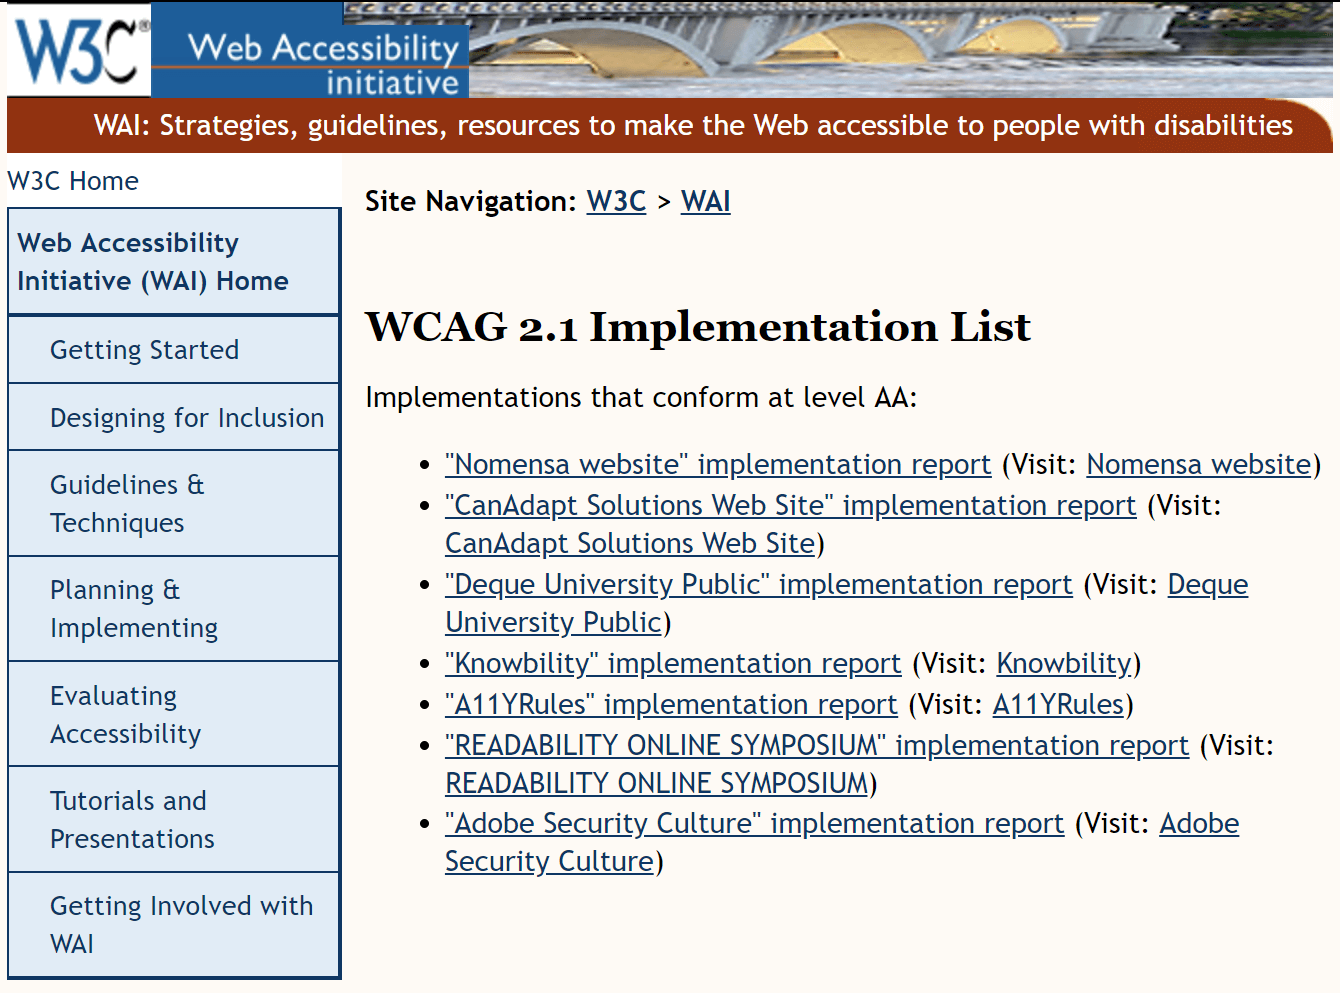 List of a few websites used in testing WCAG 2.1 implementations, including Deque University.